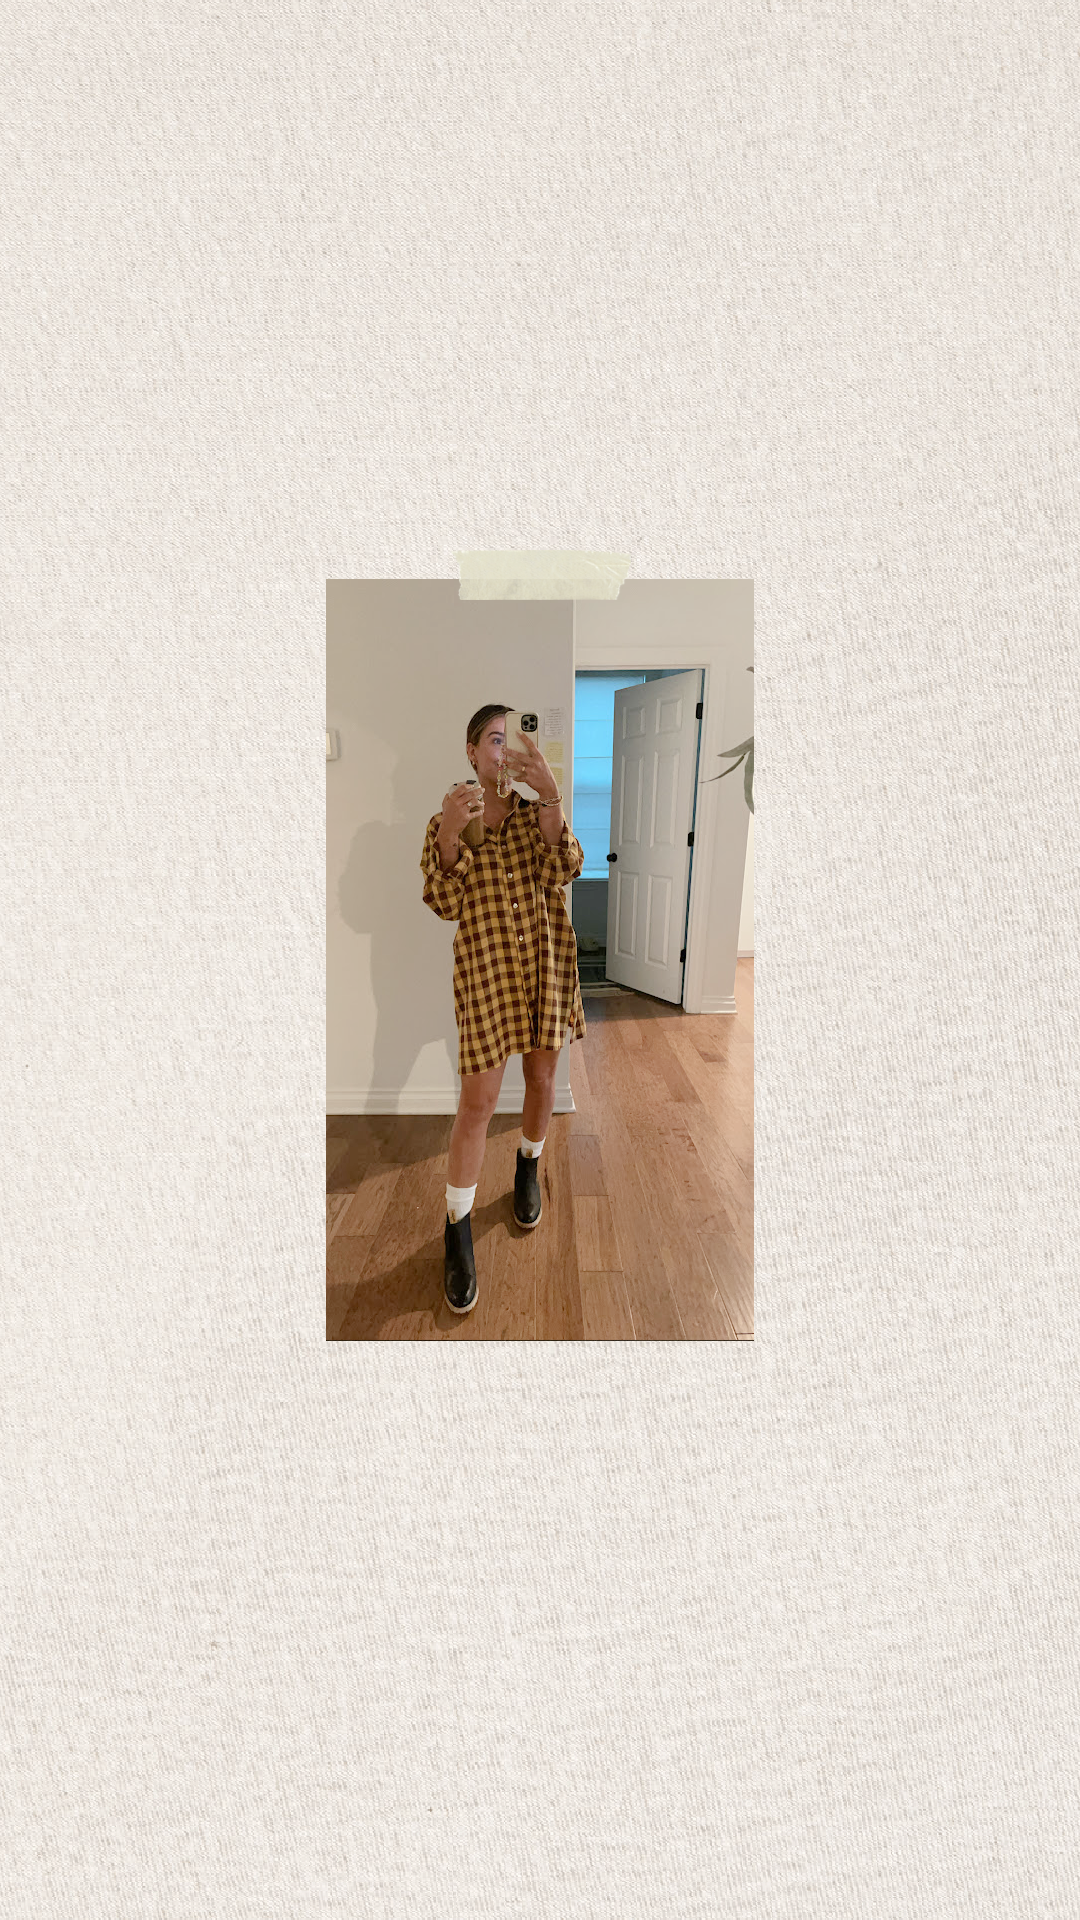 Flannel dress is a closet must, super easy to just throw on. These shoes are from Mija and ill link them here!